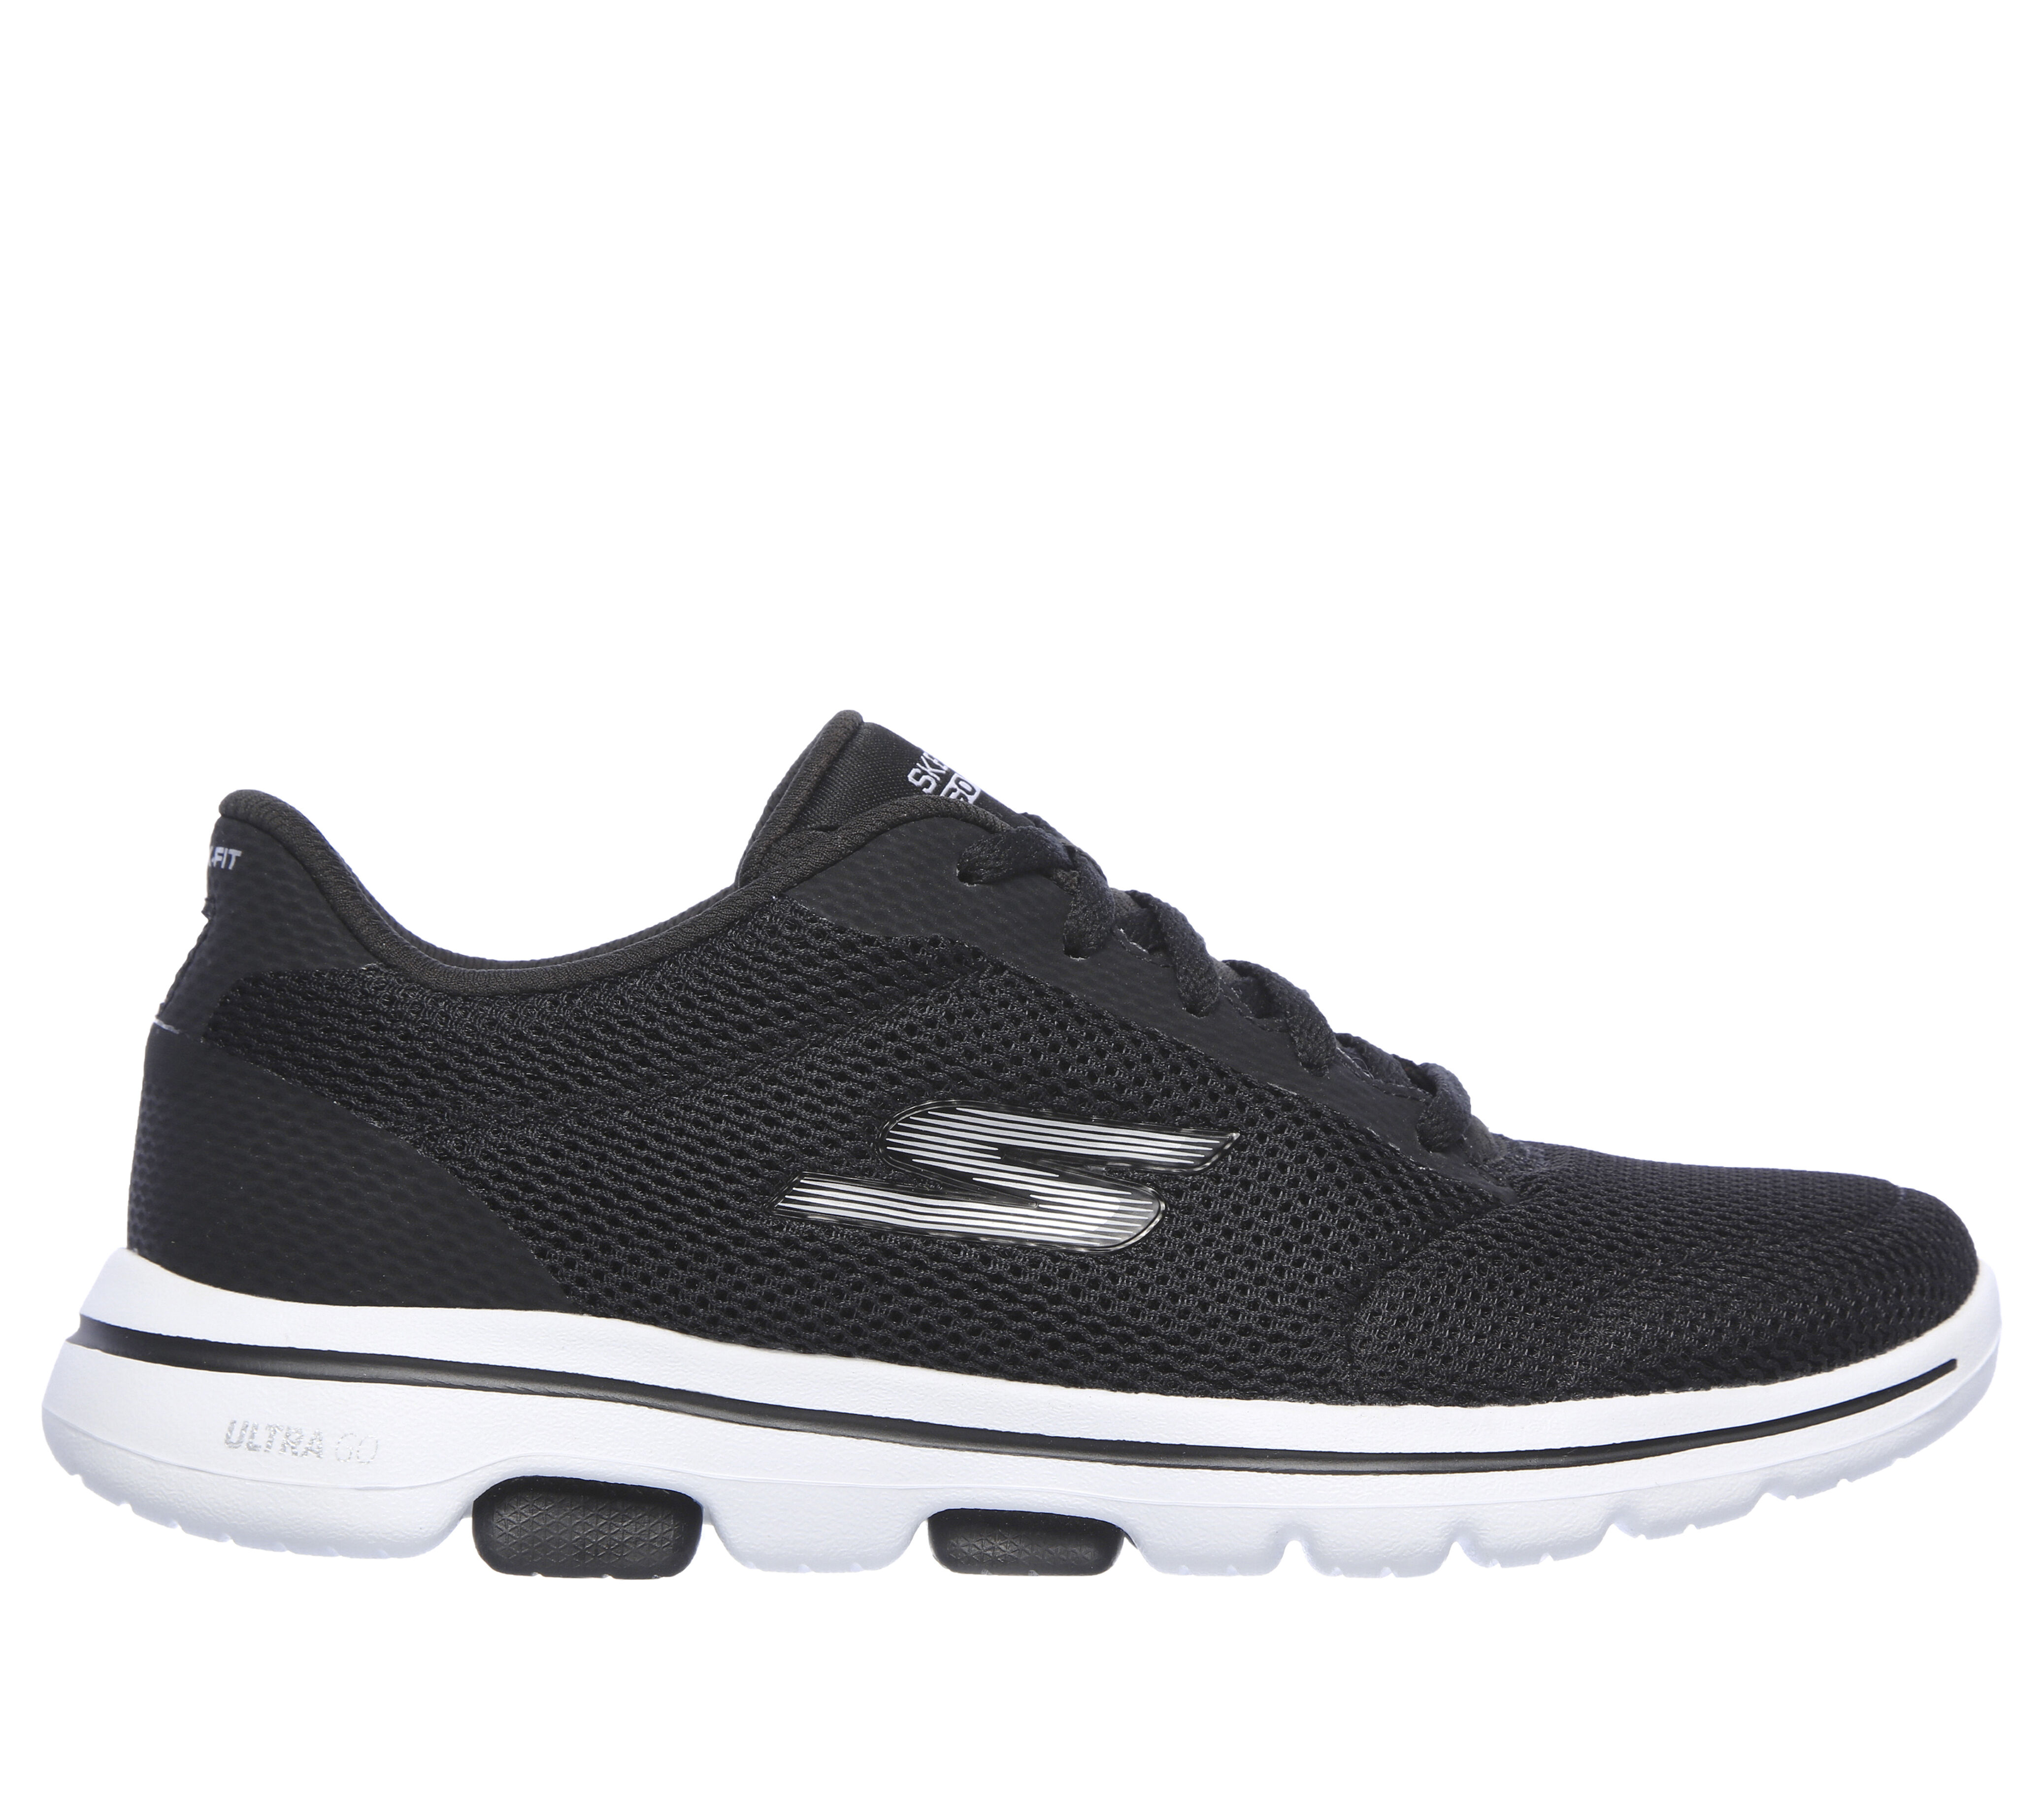 who sells sketcher shoes